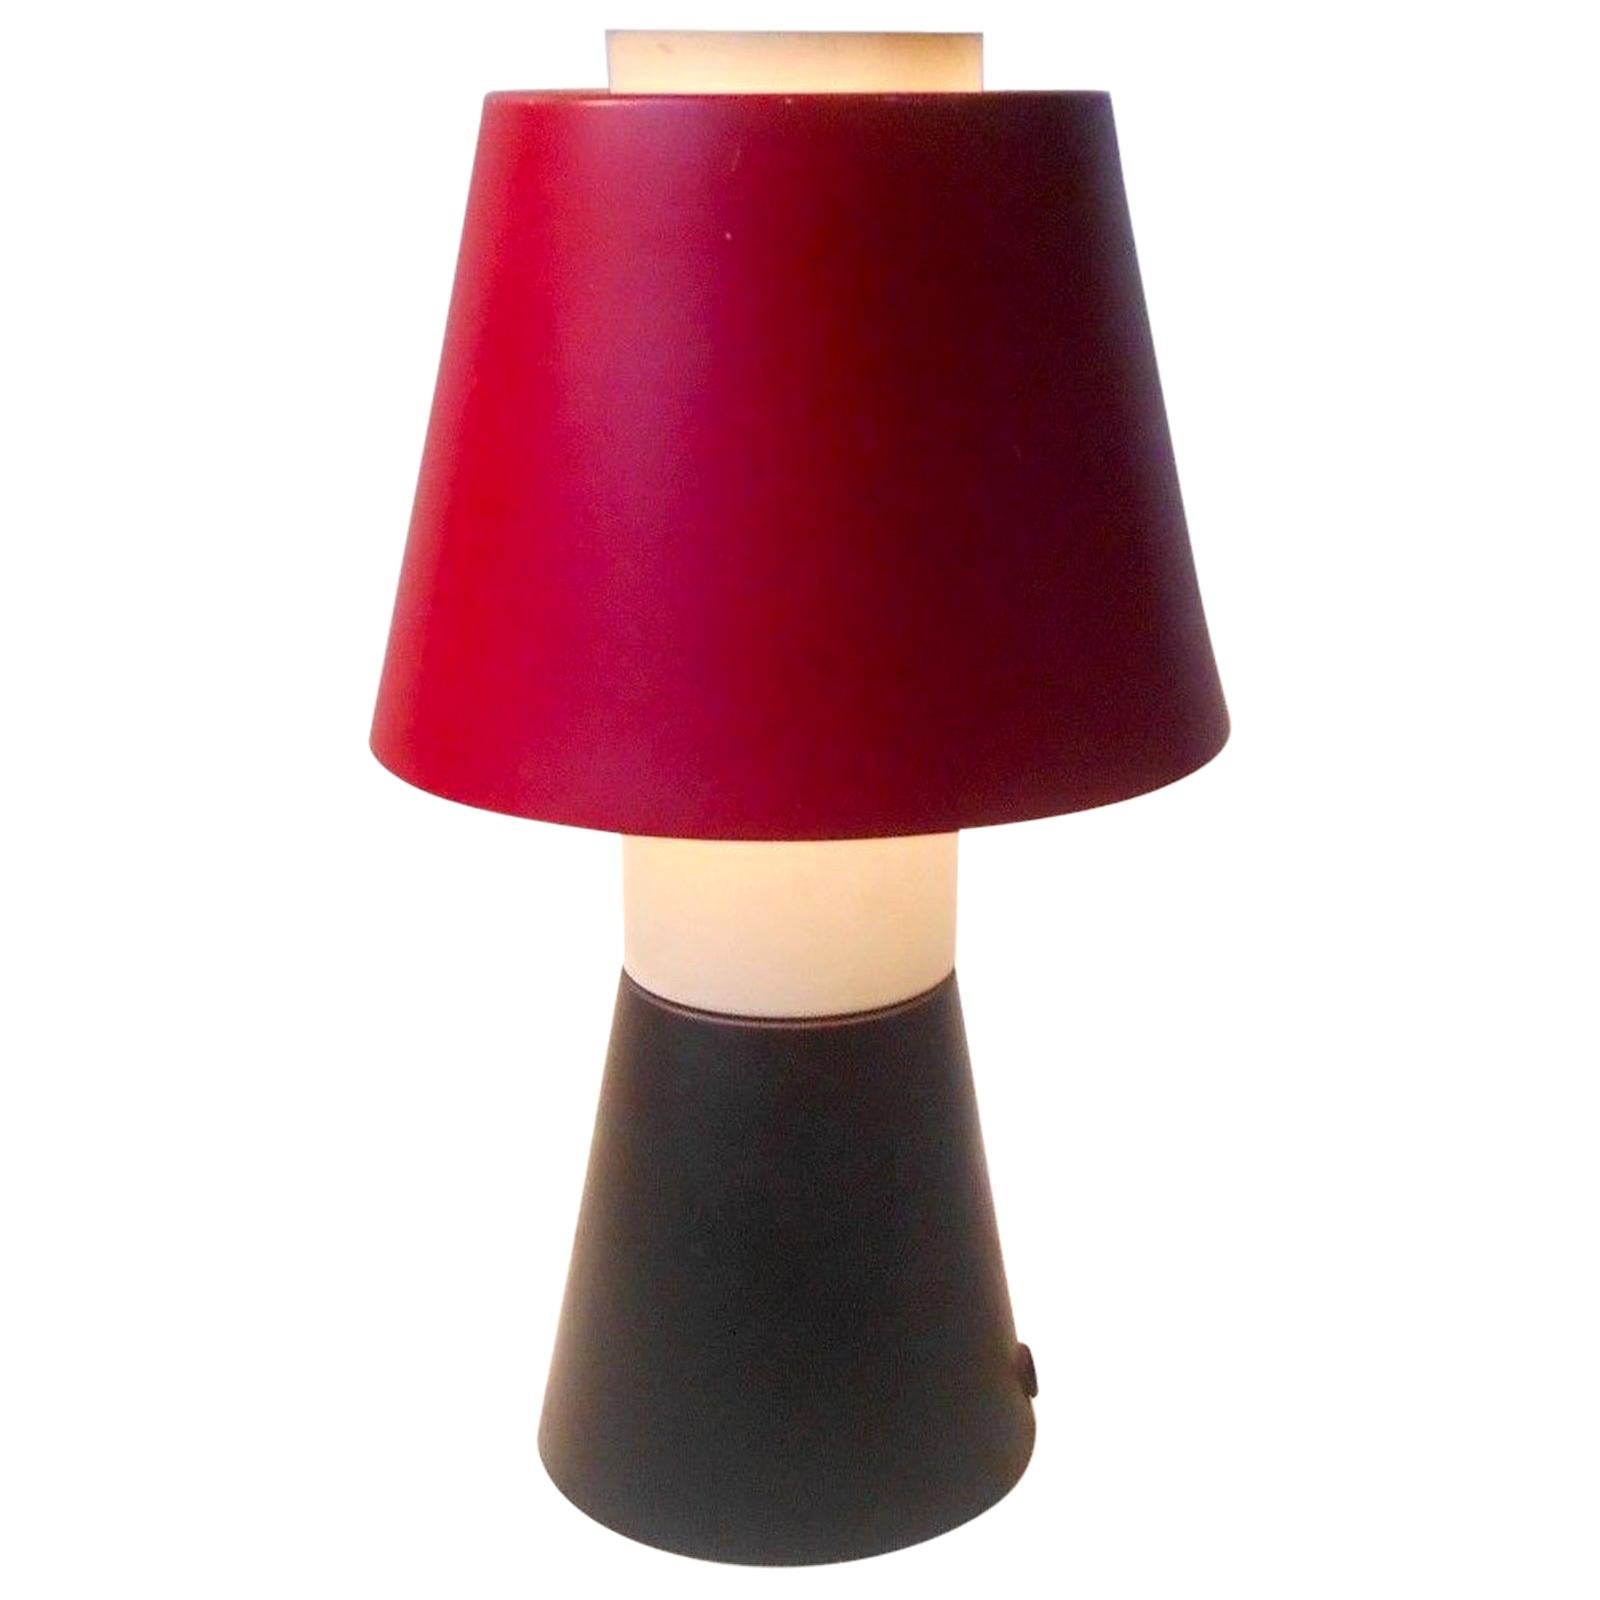 Rare Tri-color Modernist Table Lamp by Ernest Voss, Denmark, 1950s For Sale